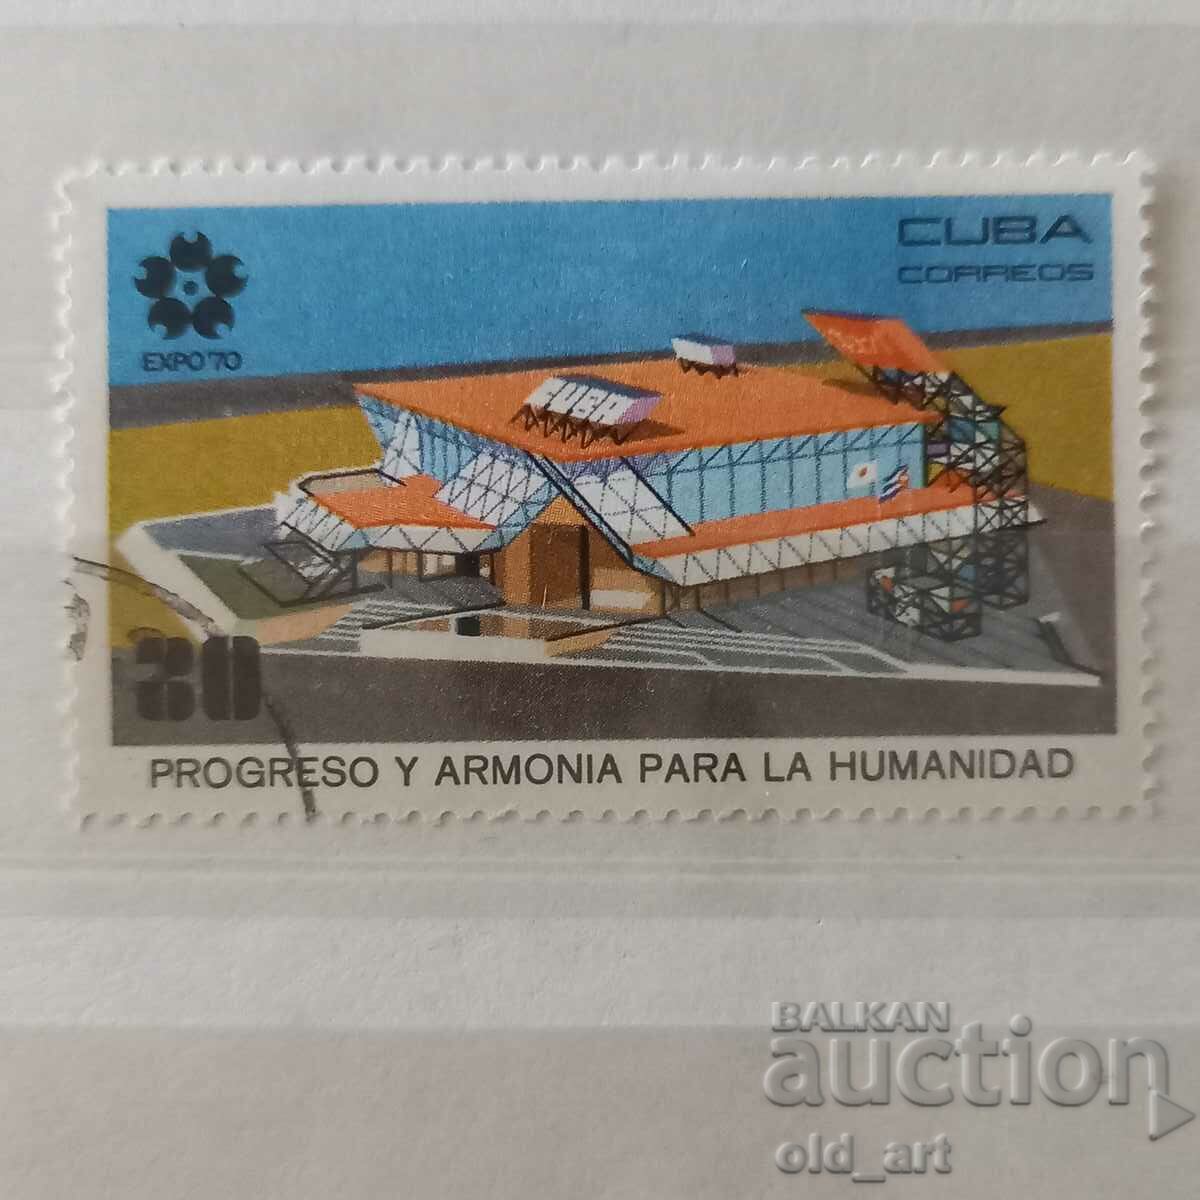 Postage stamp - Cuba, St. exhibitions, Buildings